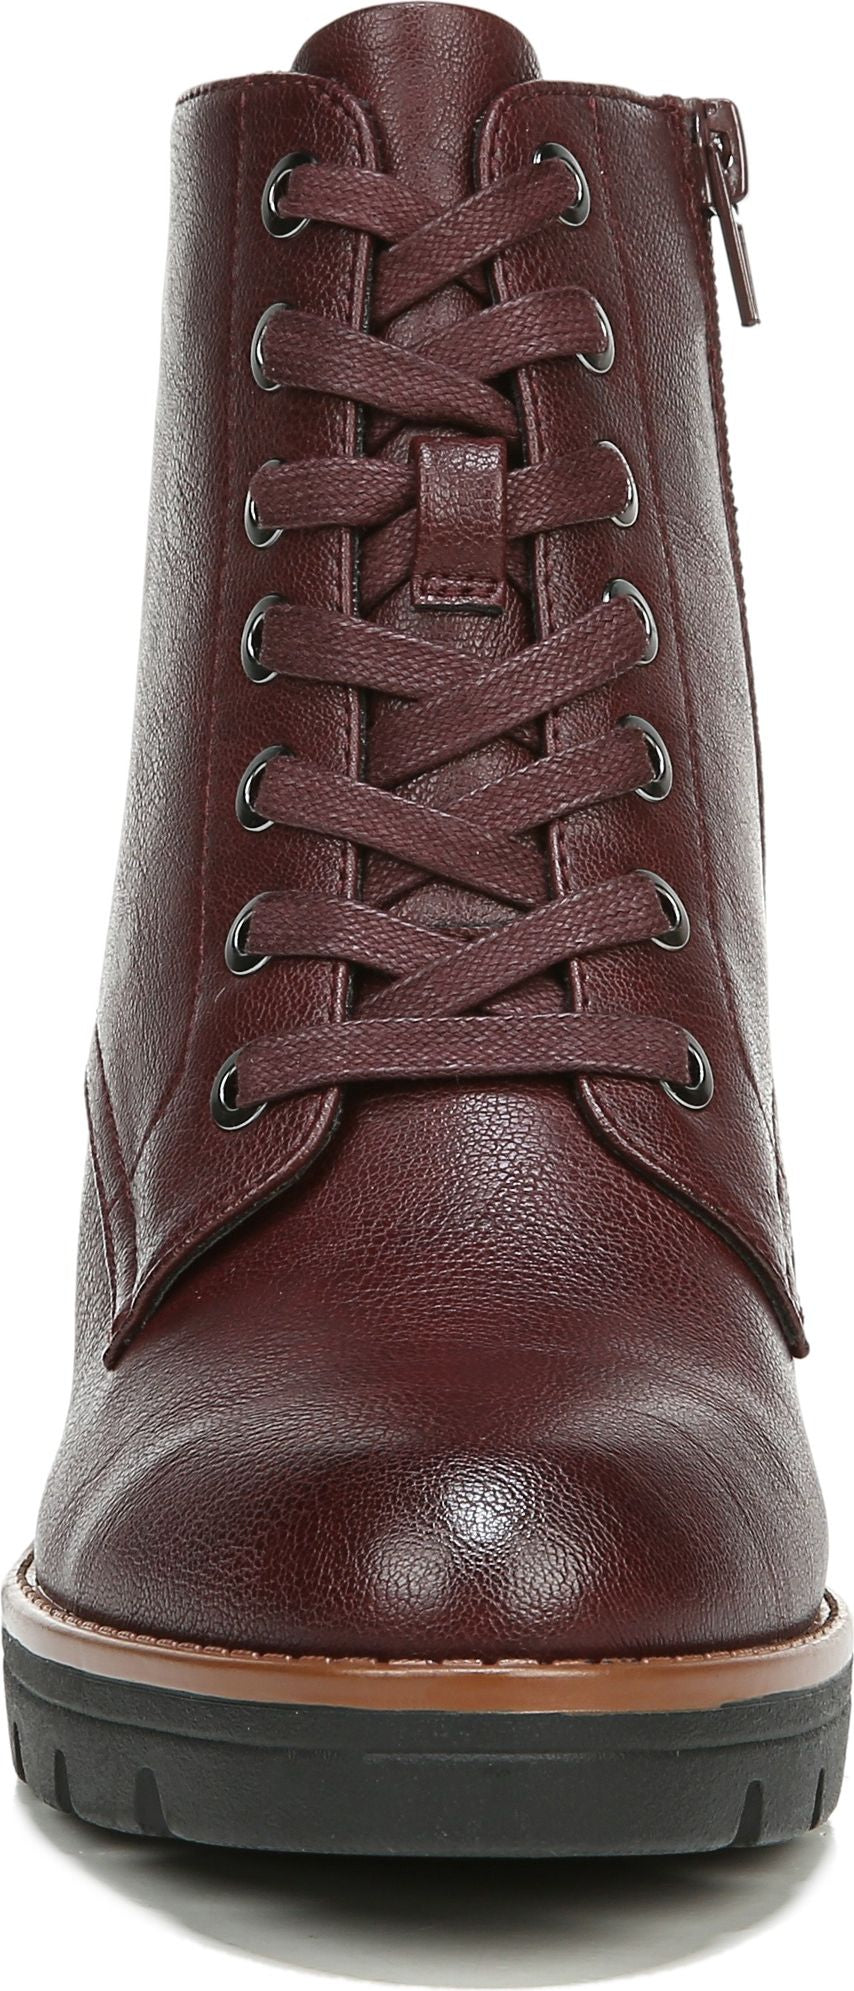 Naturalizer Boots Madalynn Lace Up Bordo - Wide